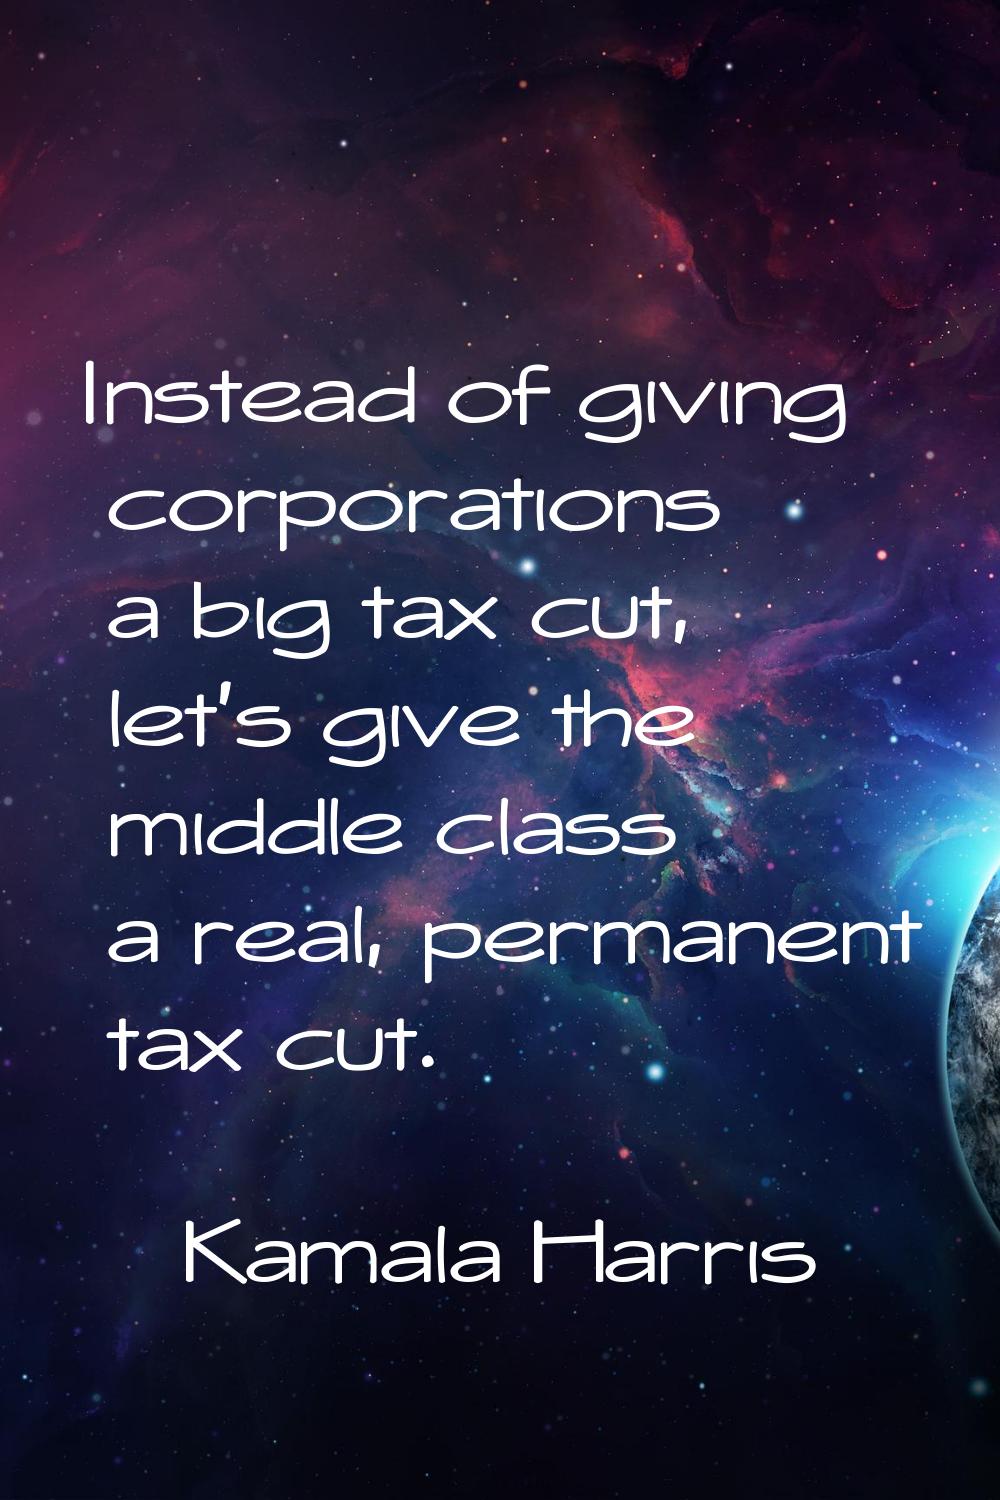 Instead of giving corporations a big tax cut, let's give the middle class a real, permanent tax cut